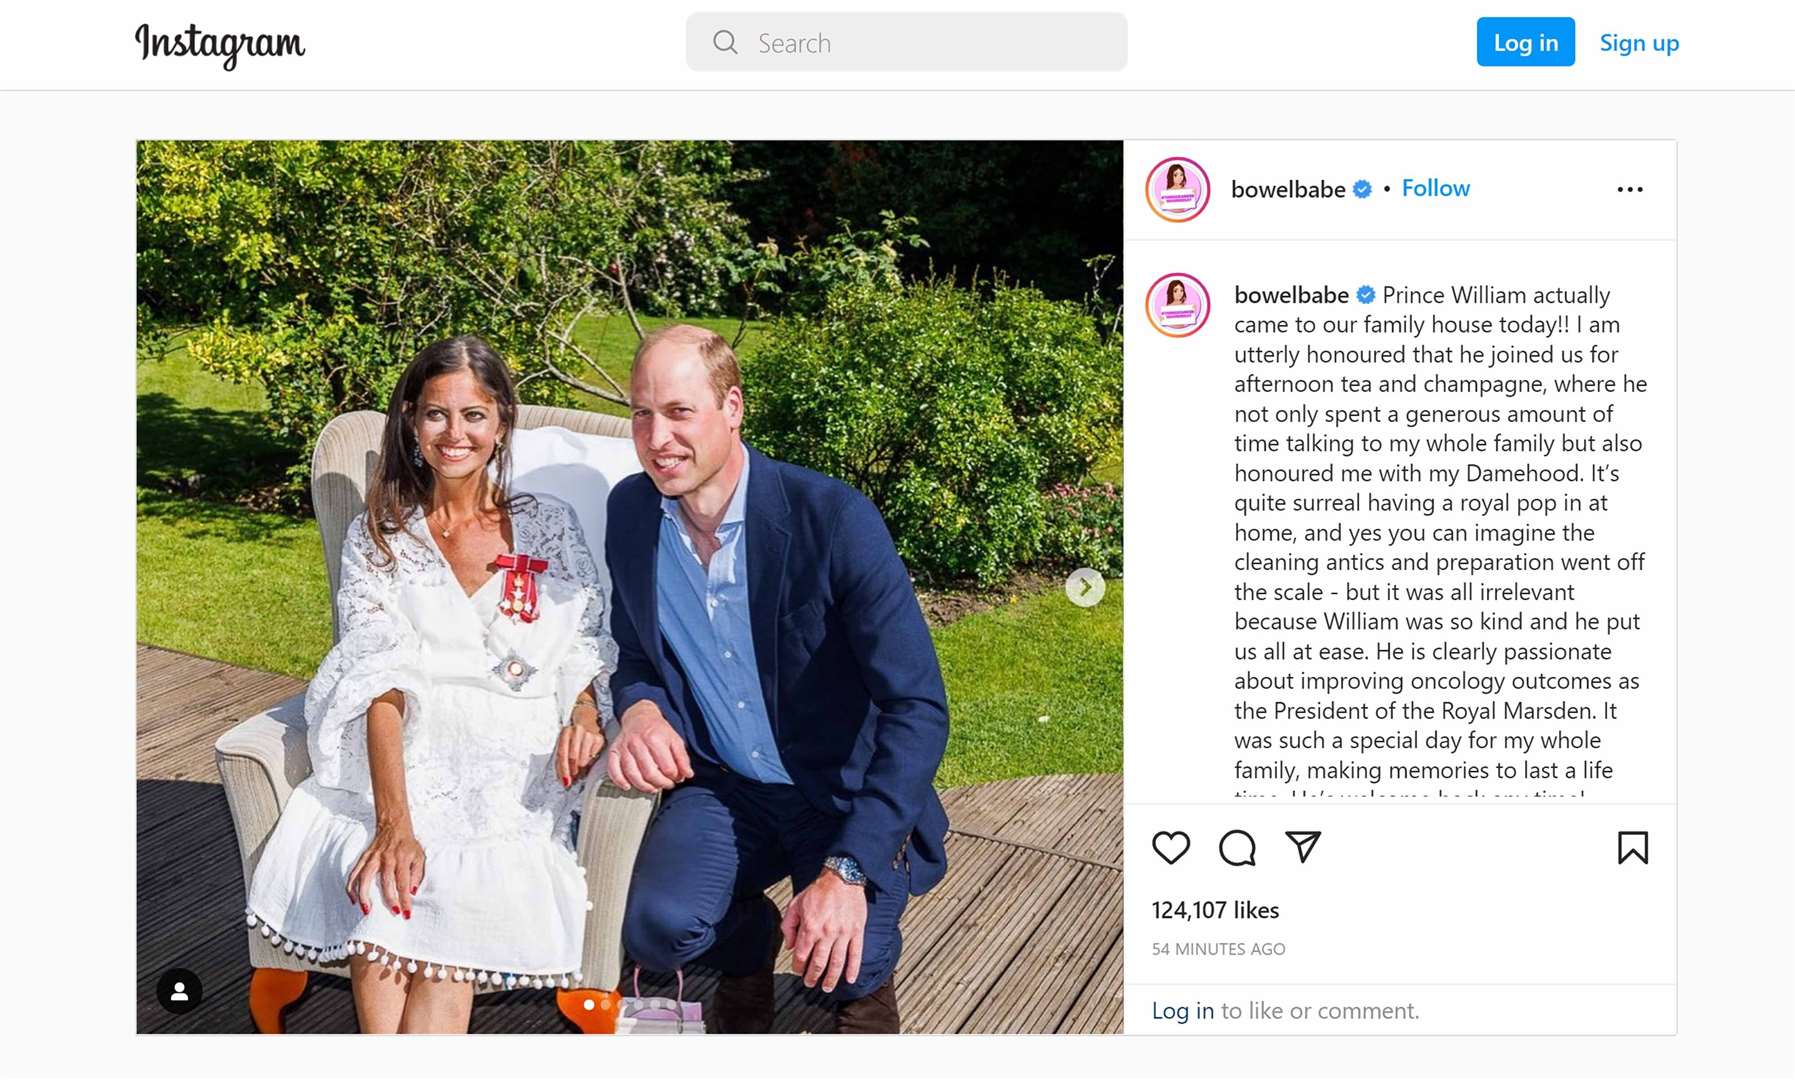 The Duke of Cambridge at the family home of Deborah James in May to honour her with a damehood (Deborah James/bowelbabe/Instagram/PA)